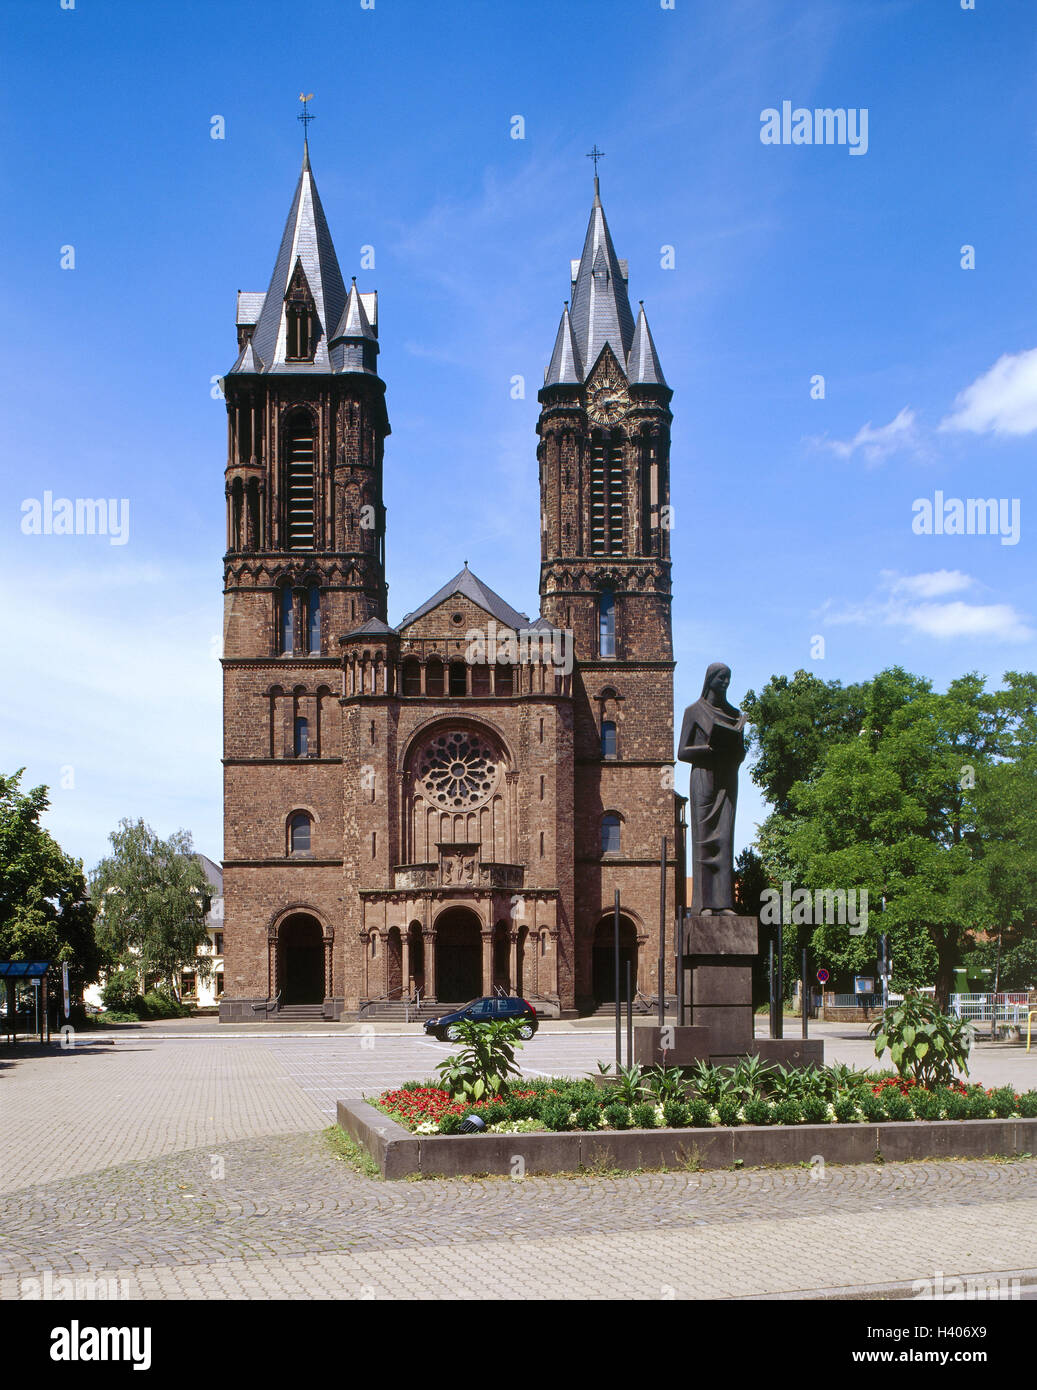 Germany, Saarland, Dillingen, Saar cathedral, Europe, district Saarlouis, town, church, Holy sacrament, church, sacred construction, structure, architecture, builds in 1910 - in 1913, architectural style historicism, brick building, steeples, two, place o Stock Photo